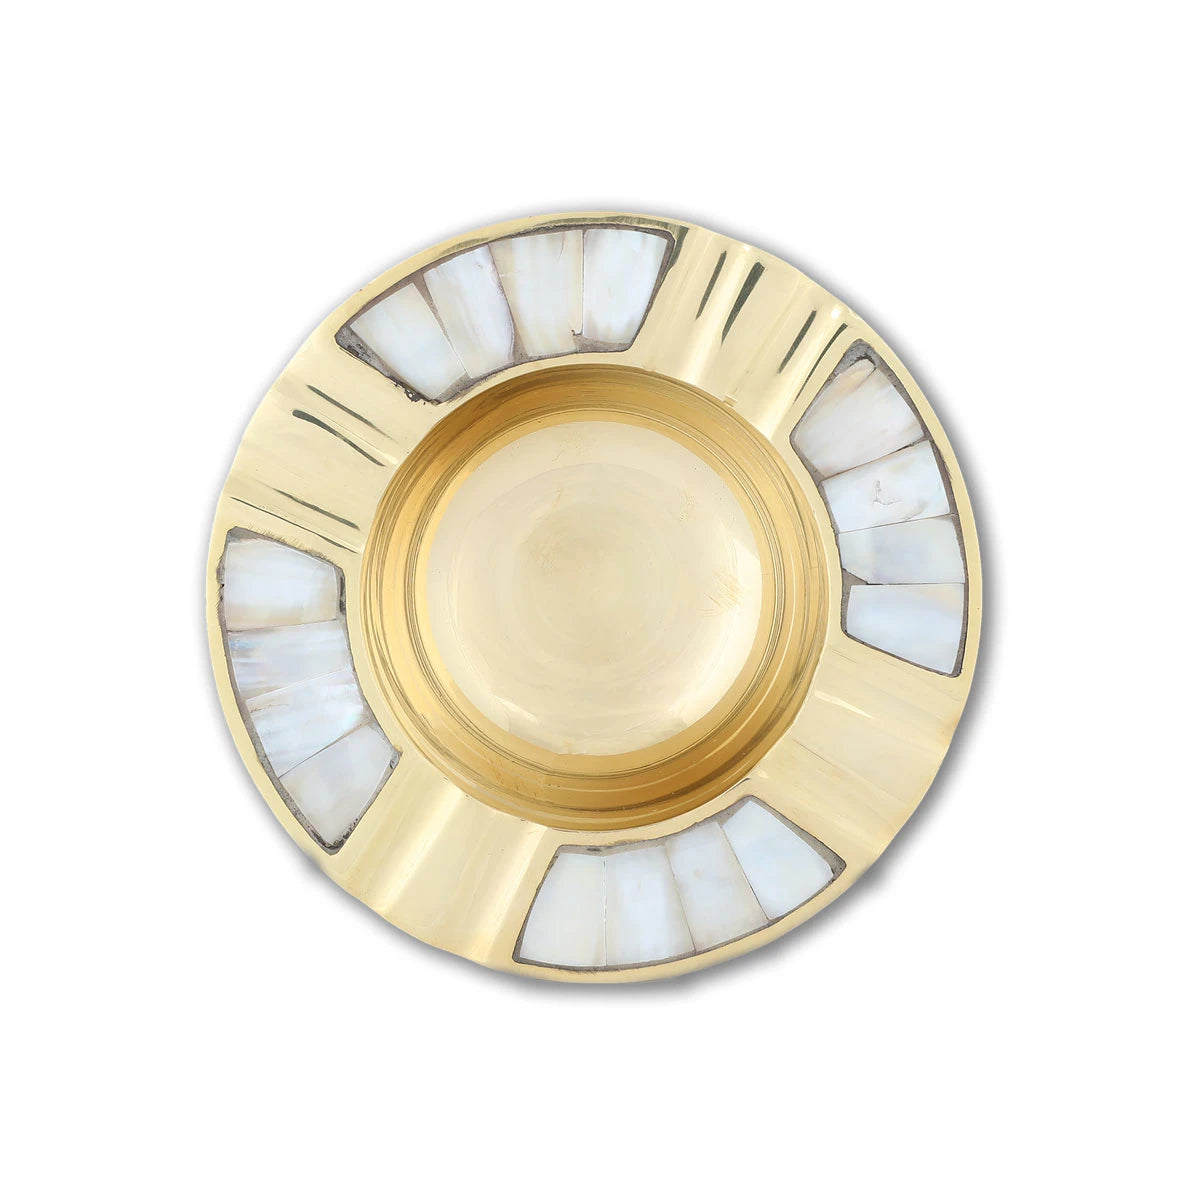 Top View of Mother of Pearl Rounded Ashtray - Gold Variant